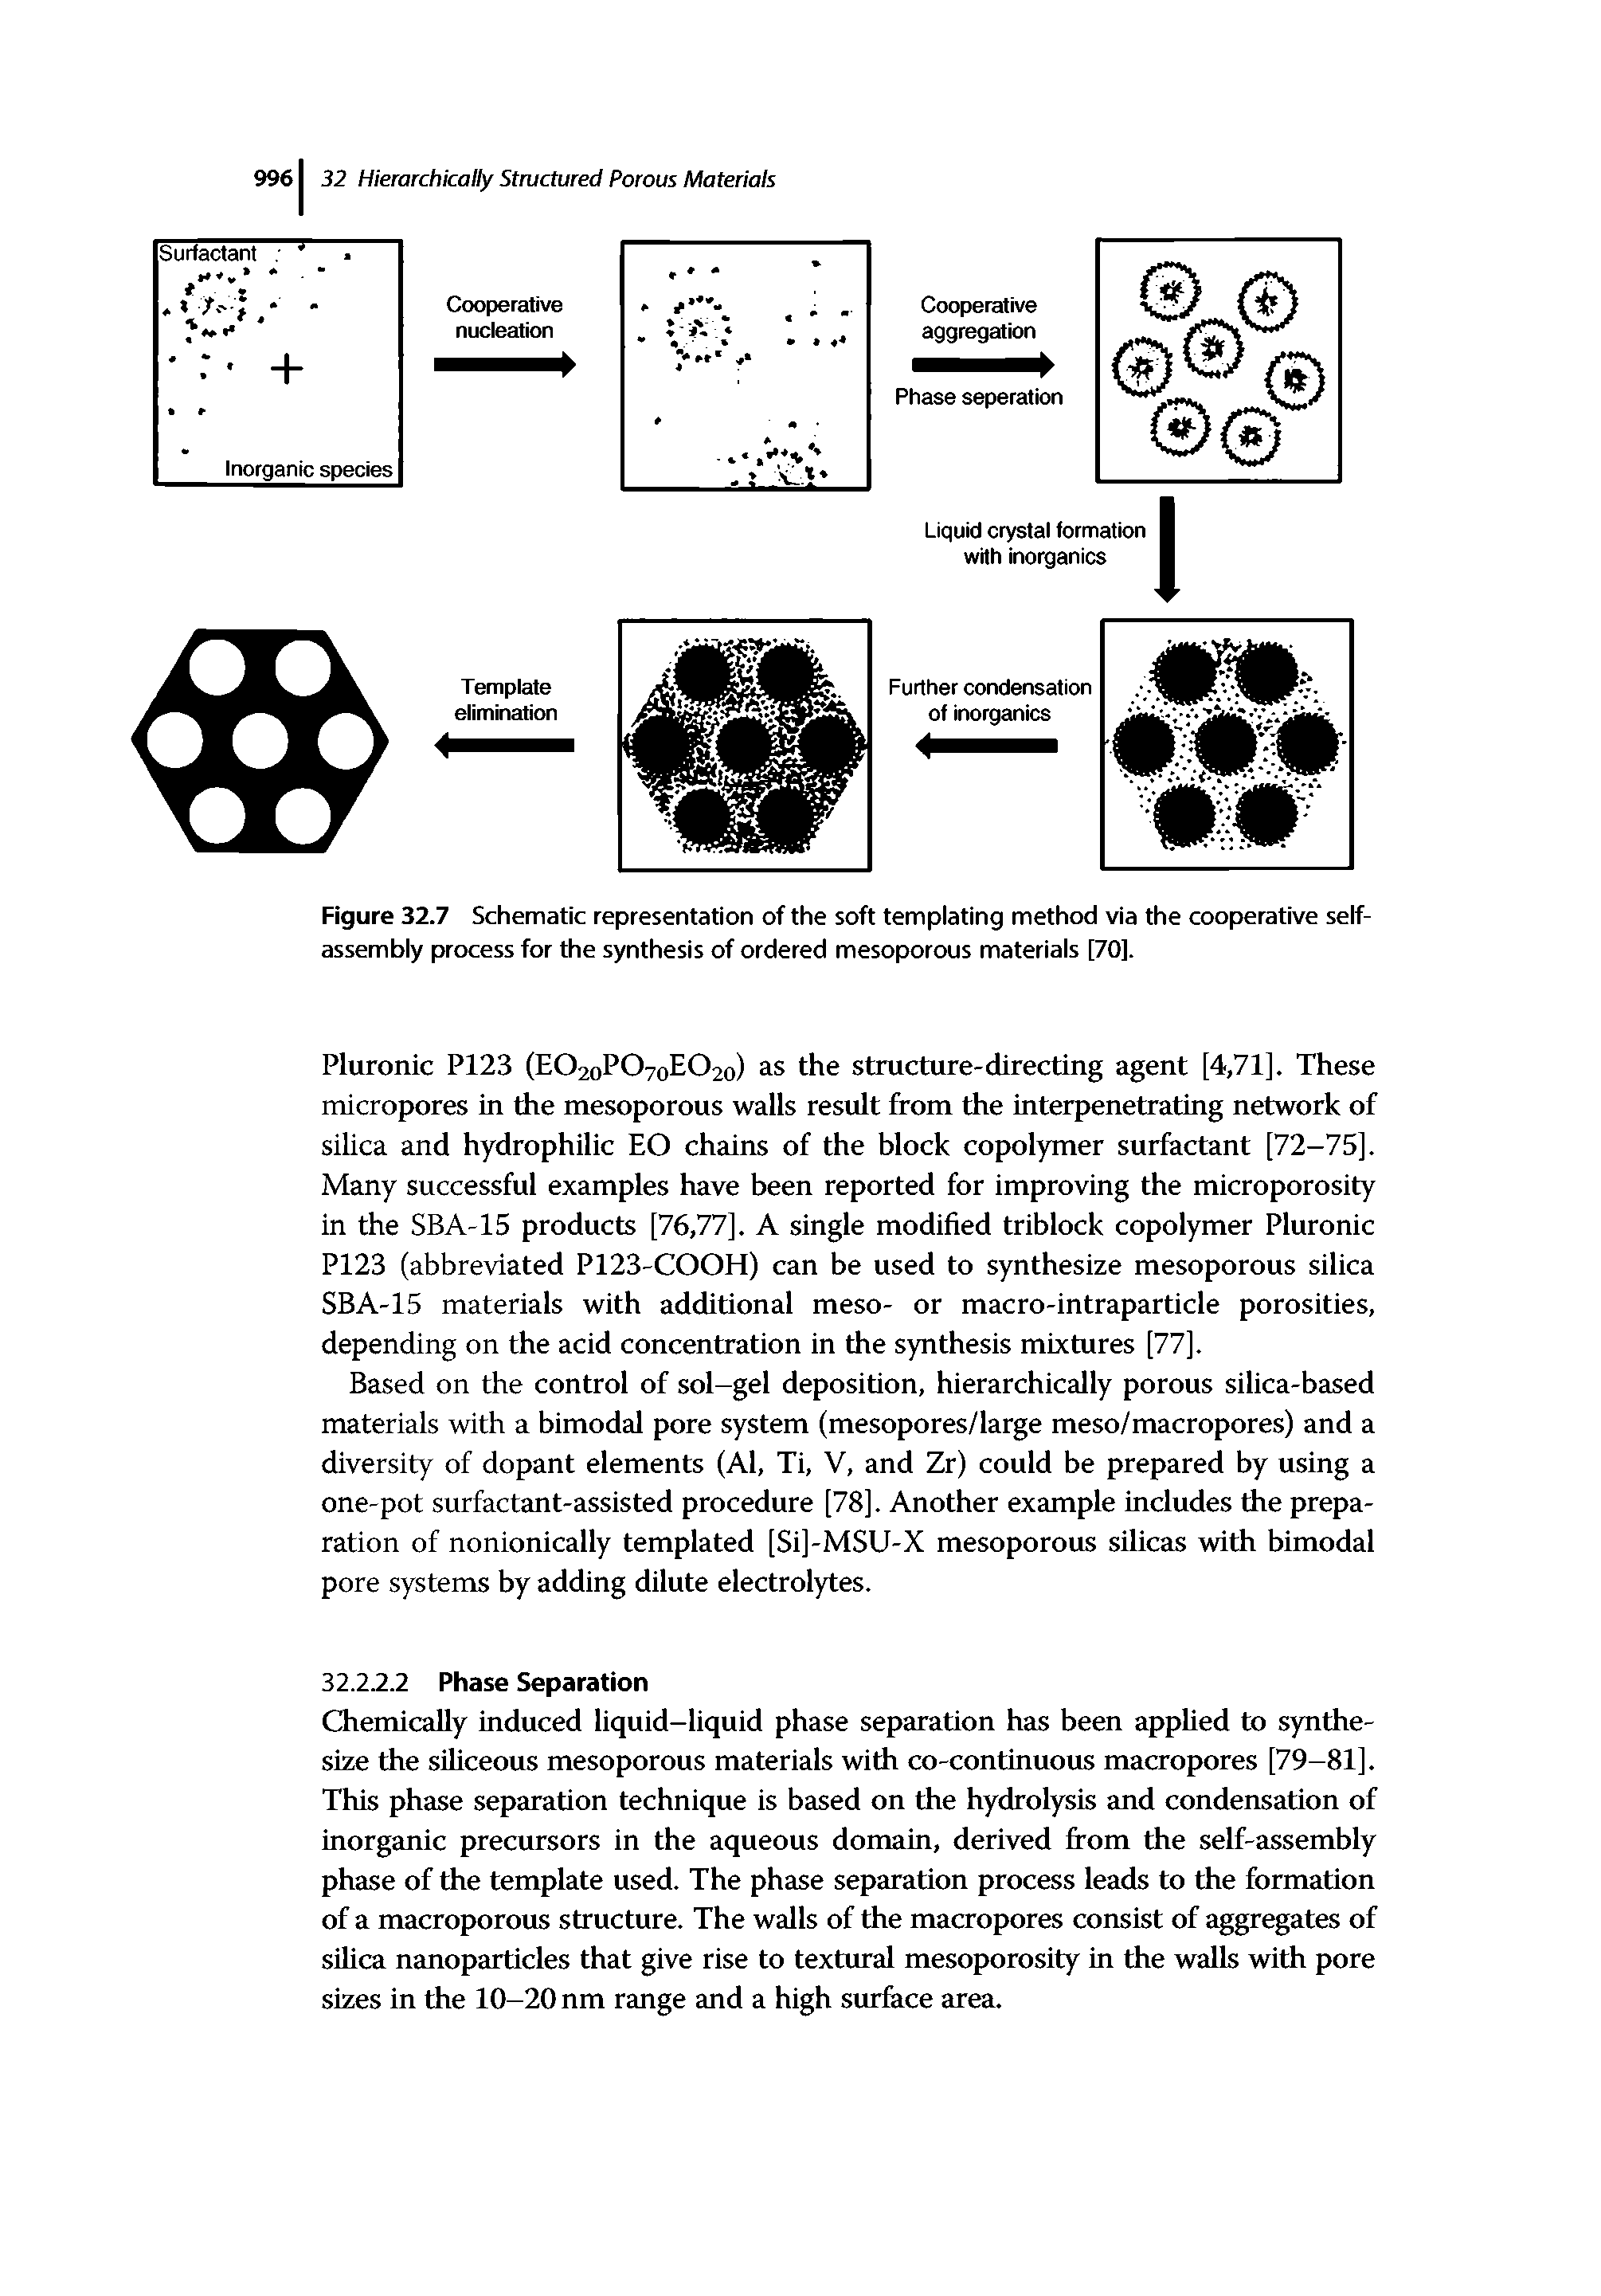 Figure 32.7 Schematic representation of the soft templating method via the cooperative self-assembly process for the synthesis of ordered mesoporous materials [70].